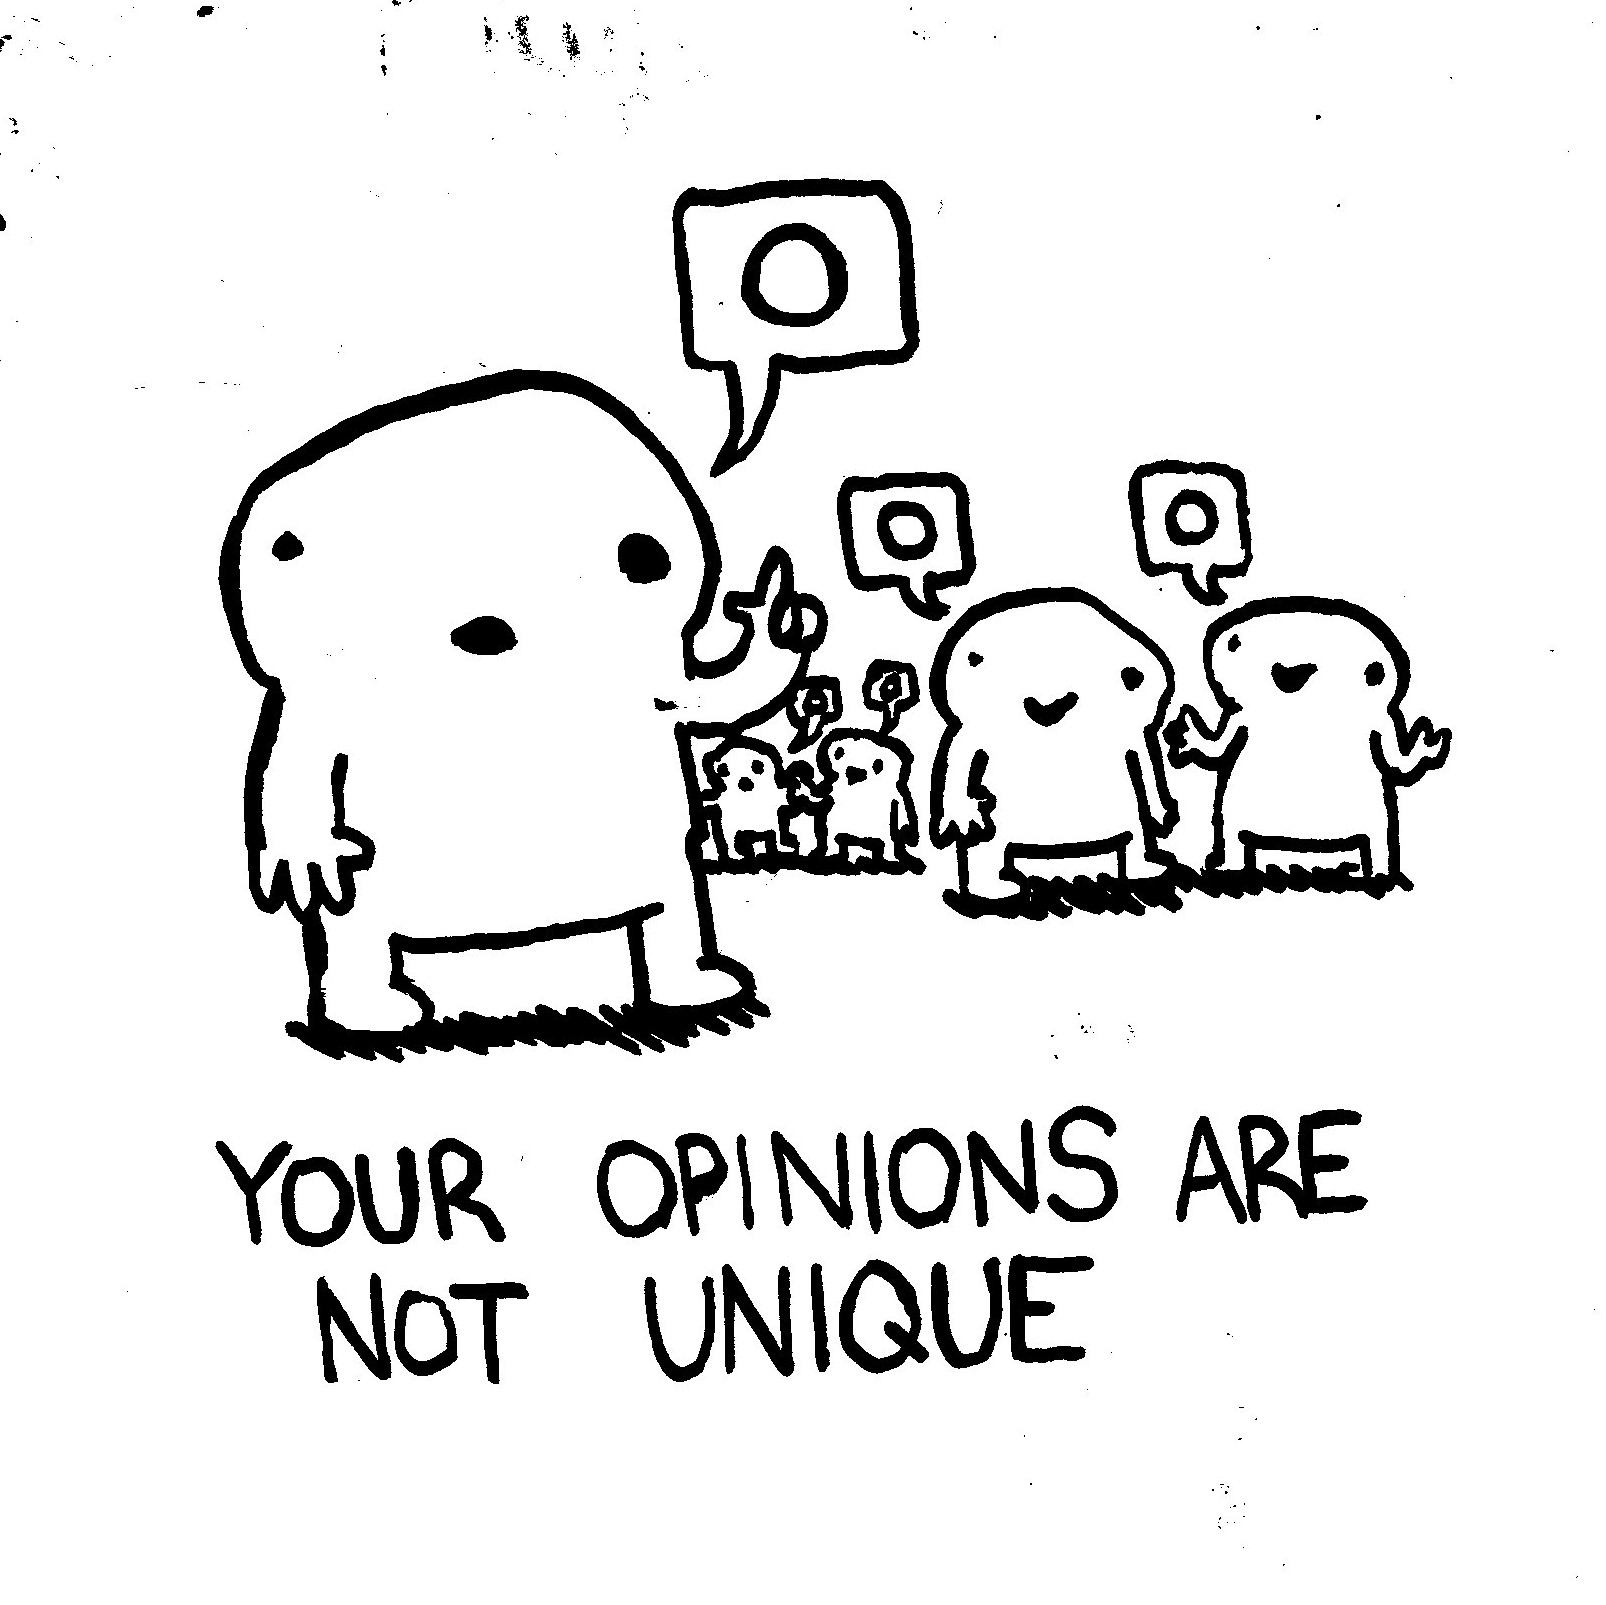 Your opinions are not unique